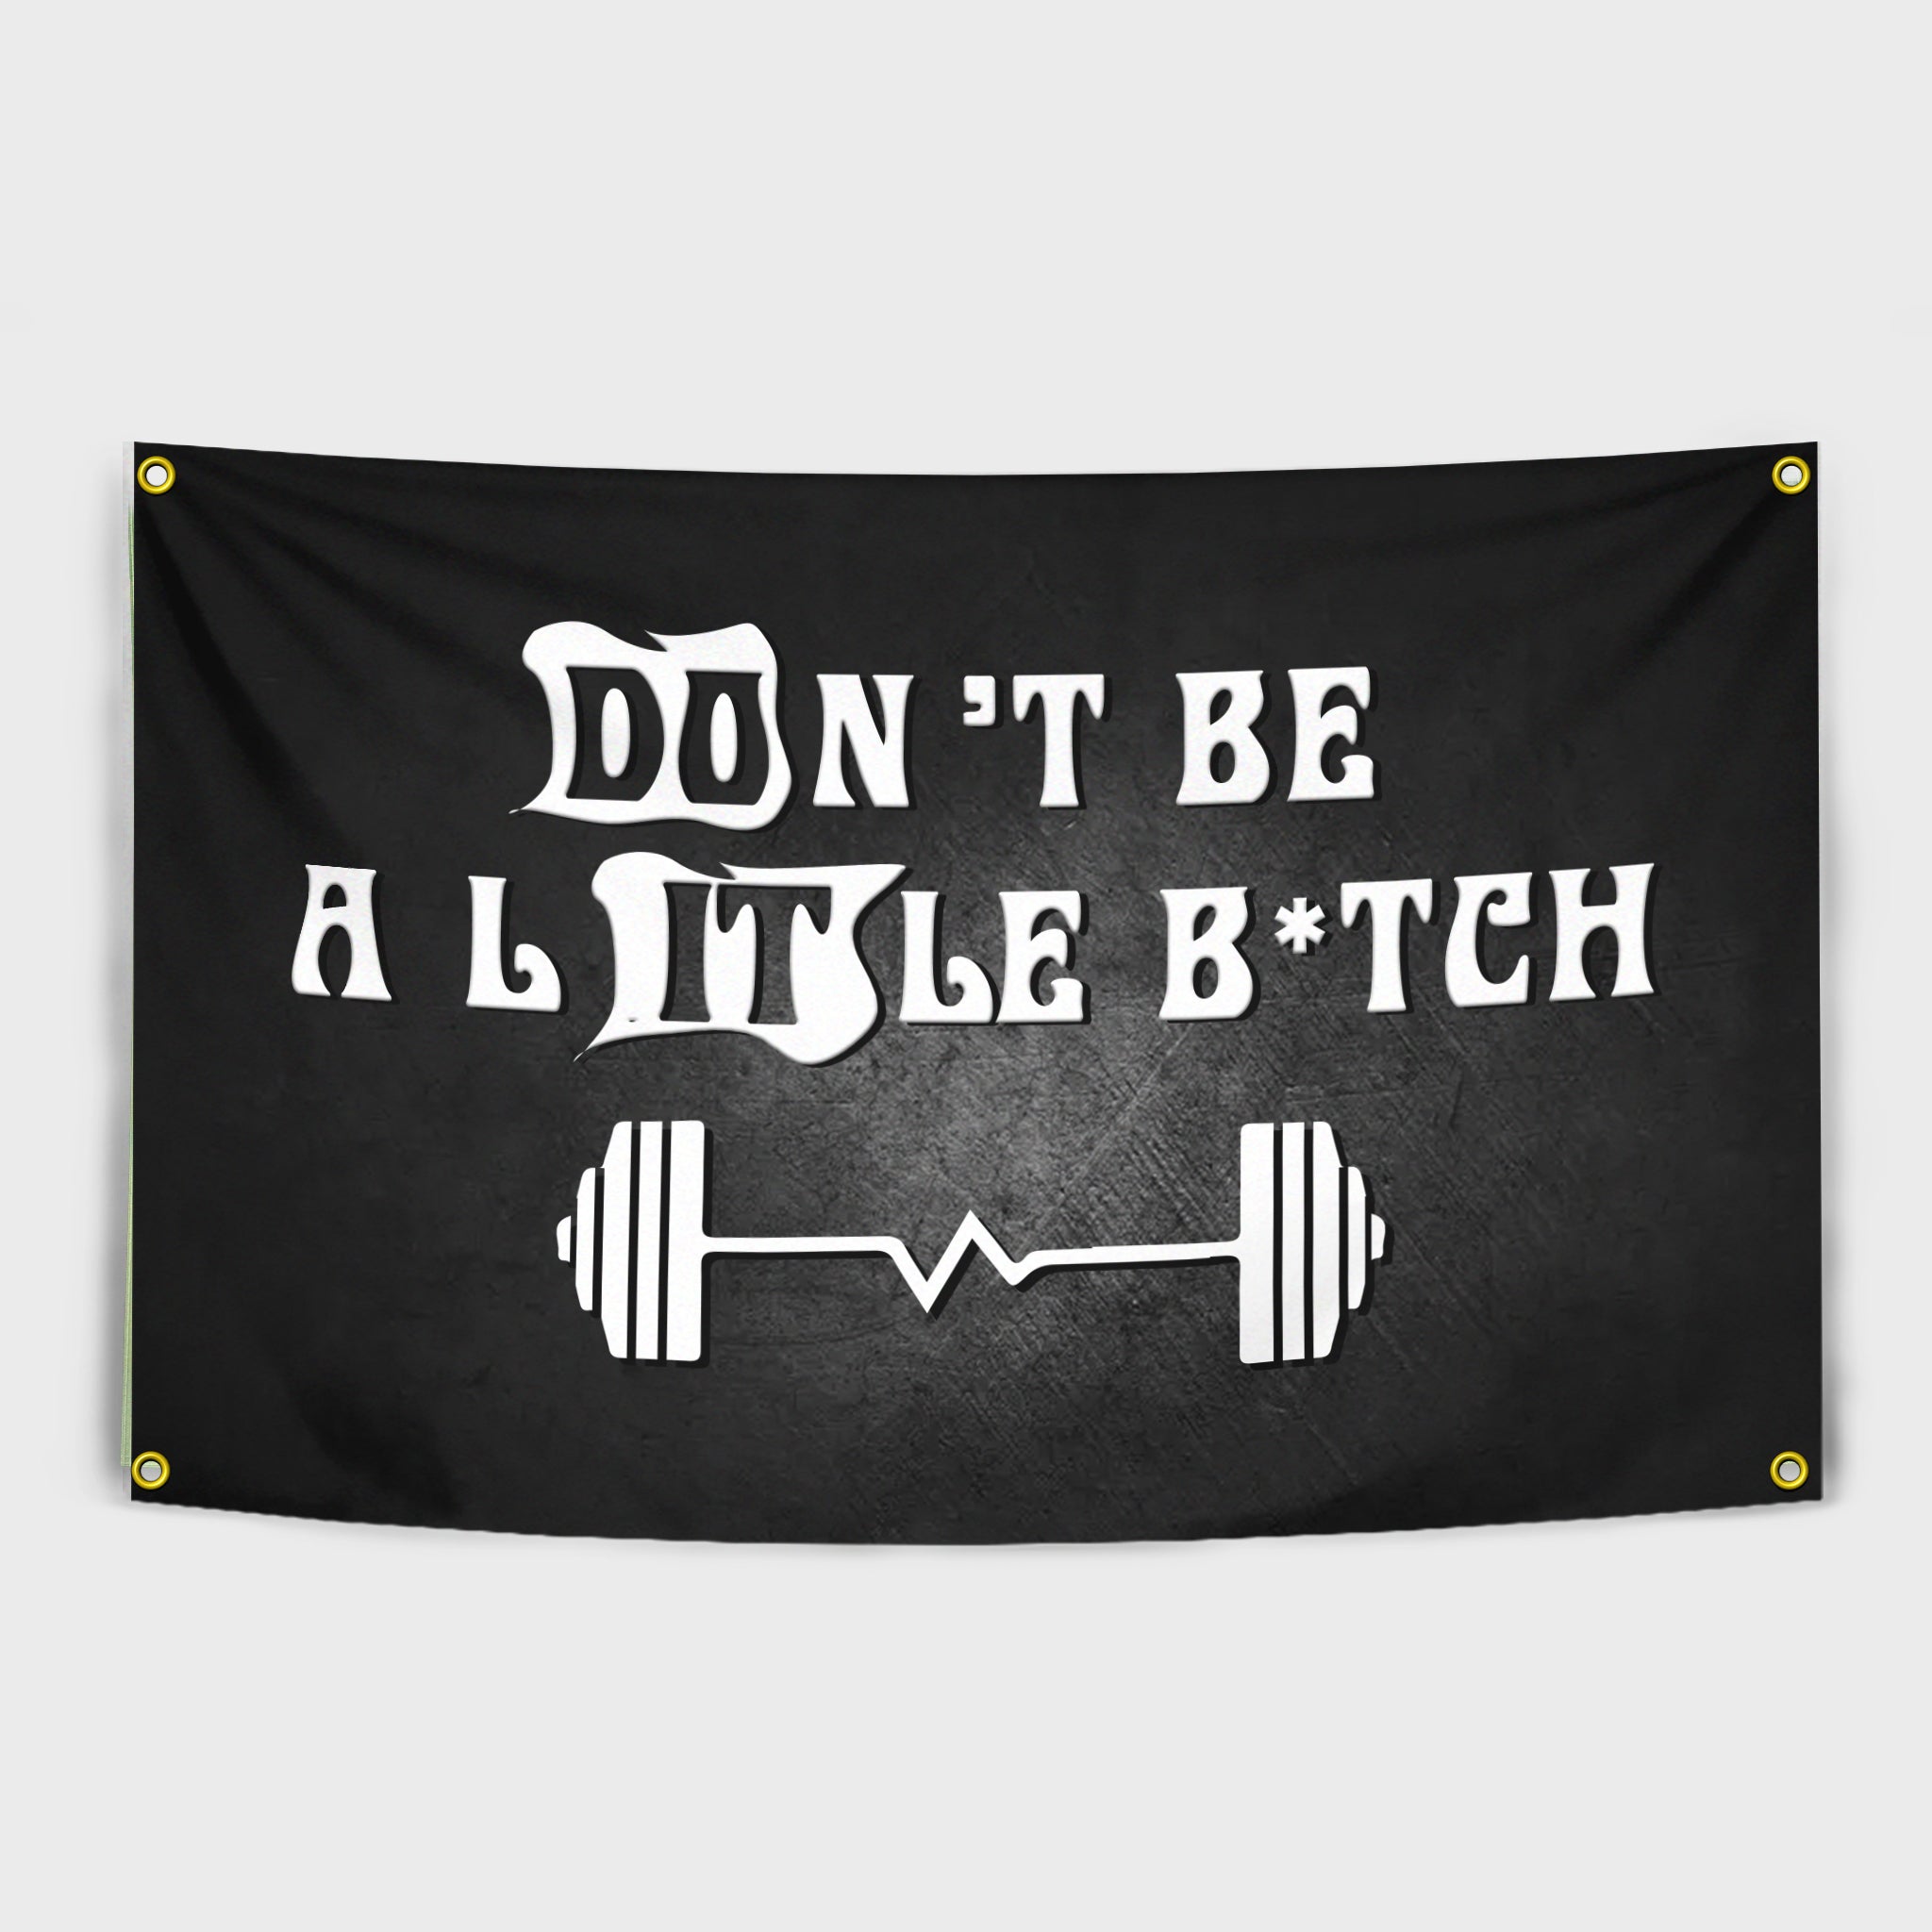 Don't be a little B*tch Flag Banner for Home Gym and Fitness Club